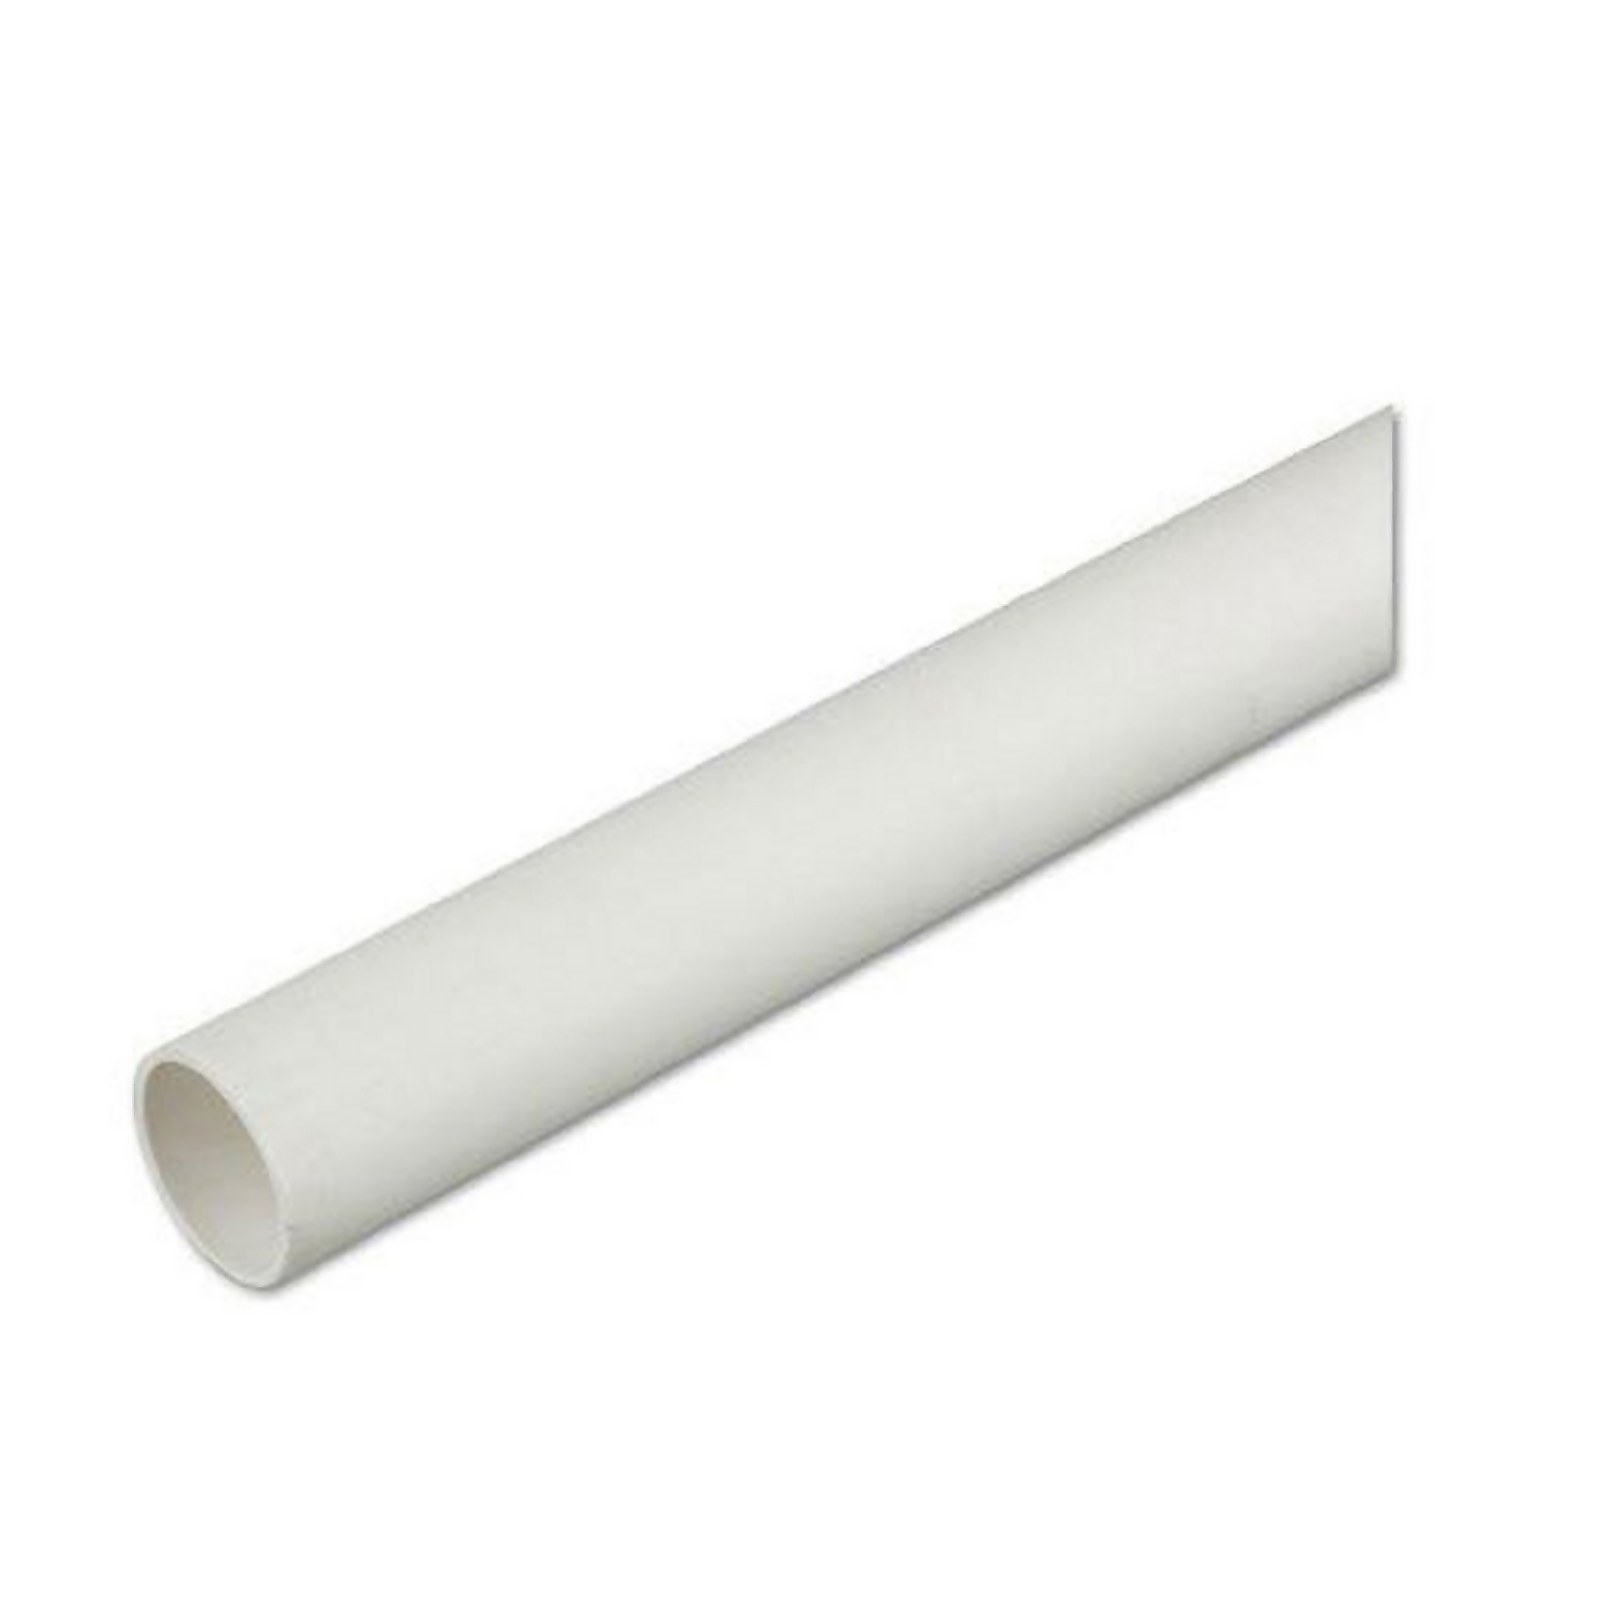 Photo of Universal Waste Pipe - 32mm X 2m